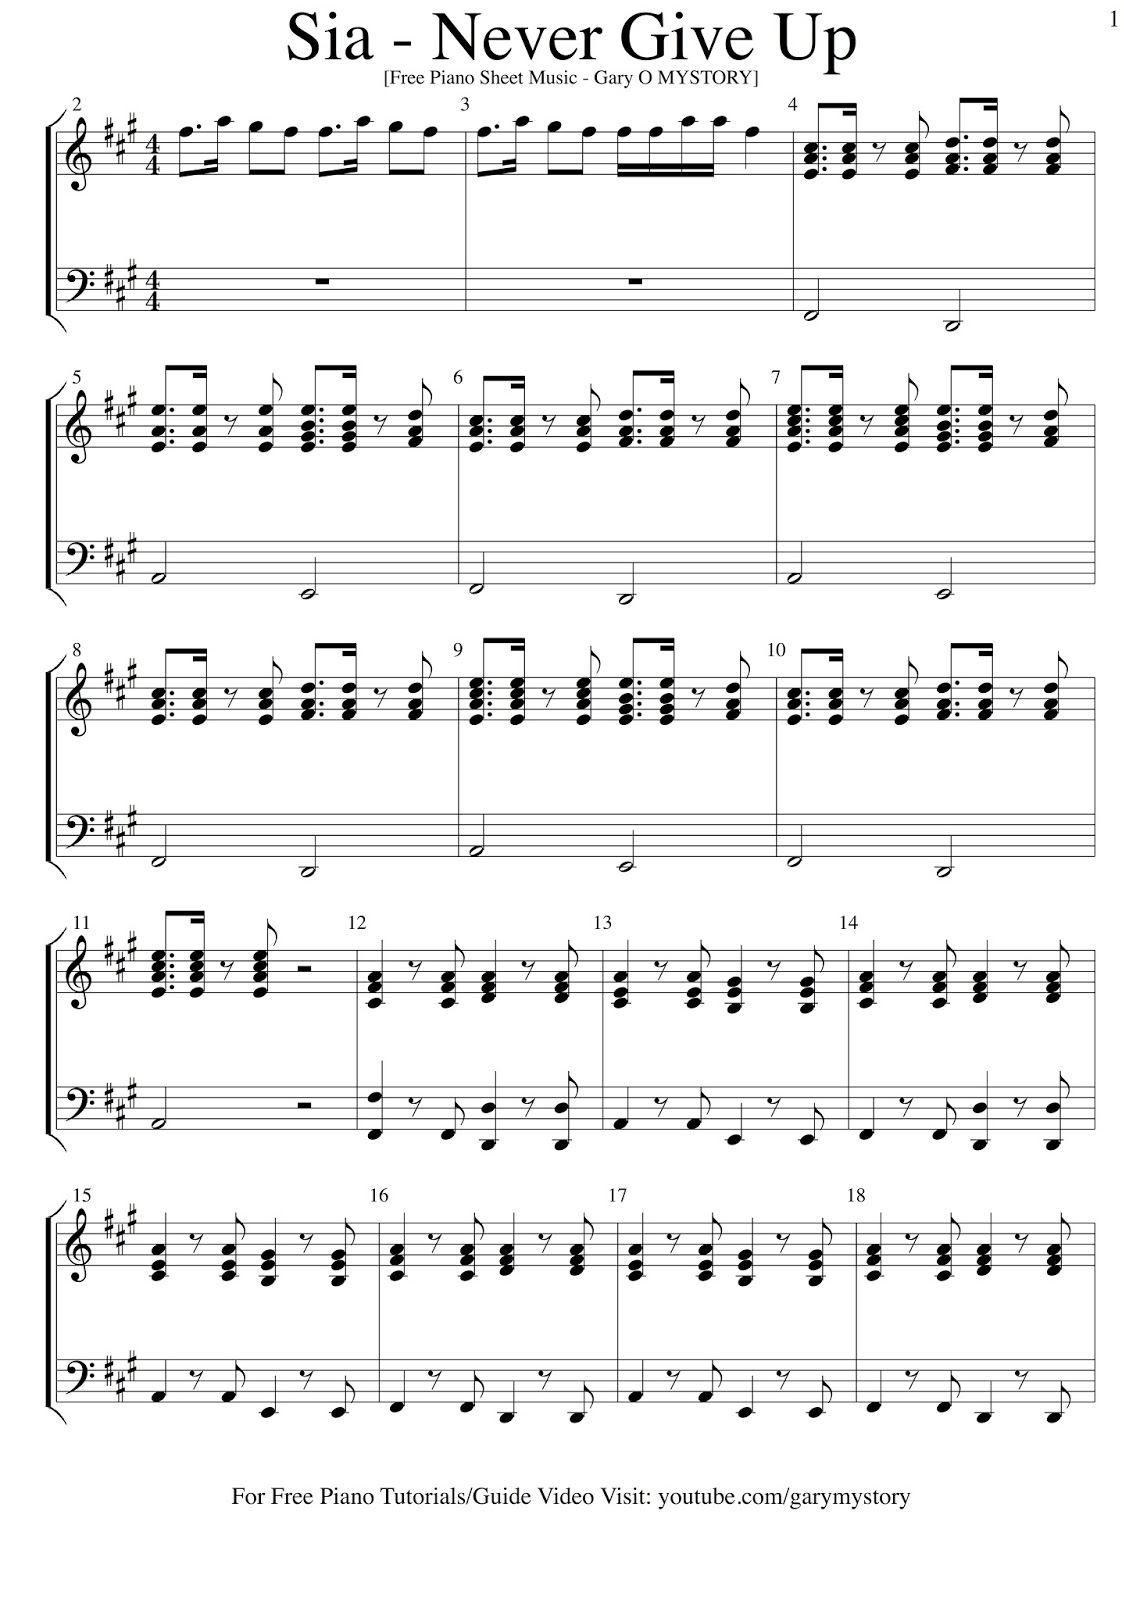 Sia - Never Give Up FREE PIANO SHEET MUSIC (Easy Piano Tutorial Video